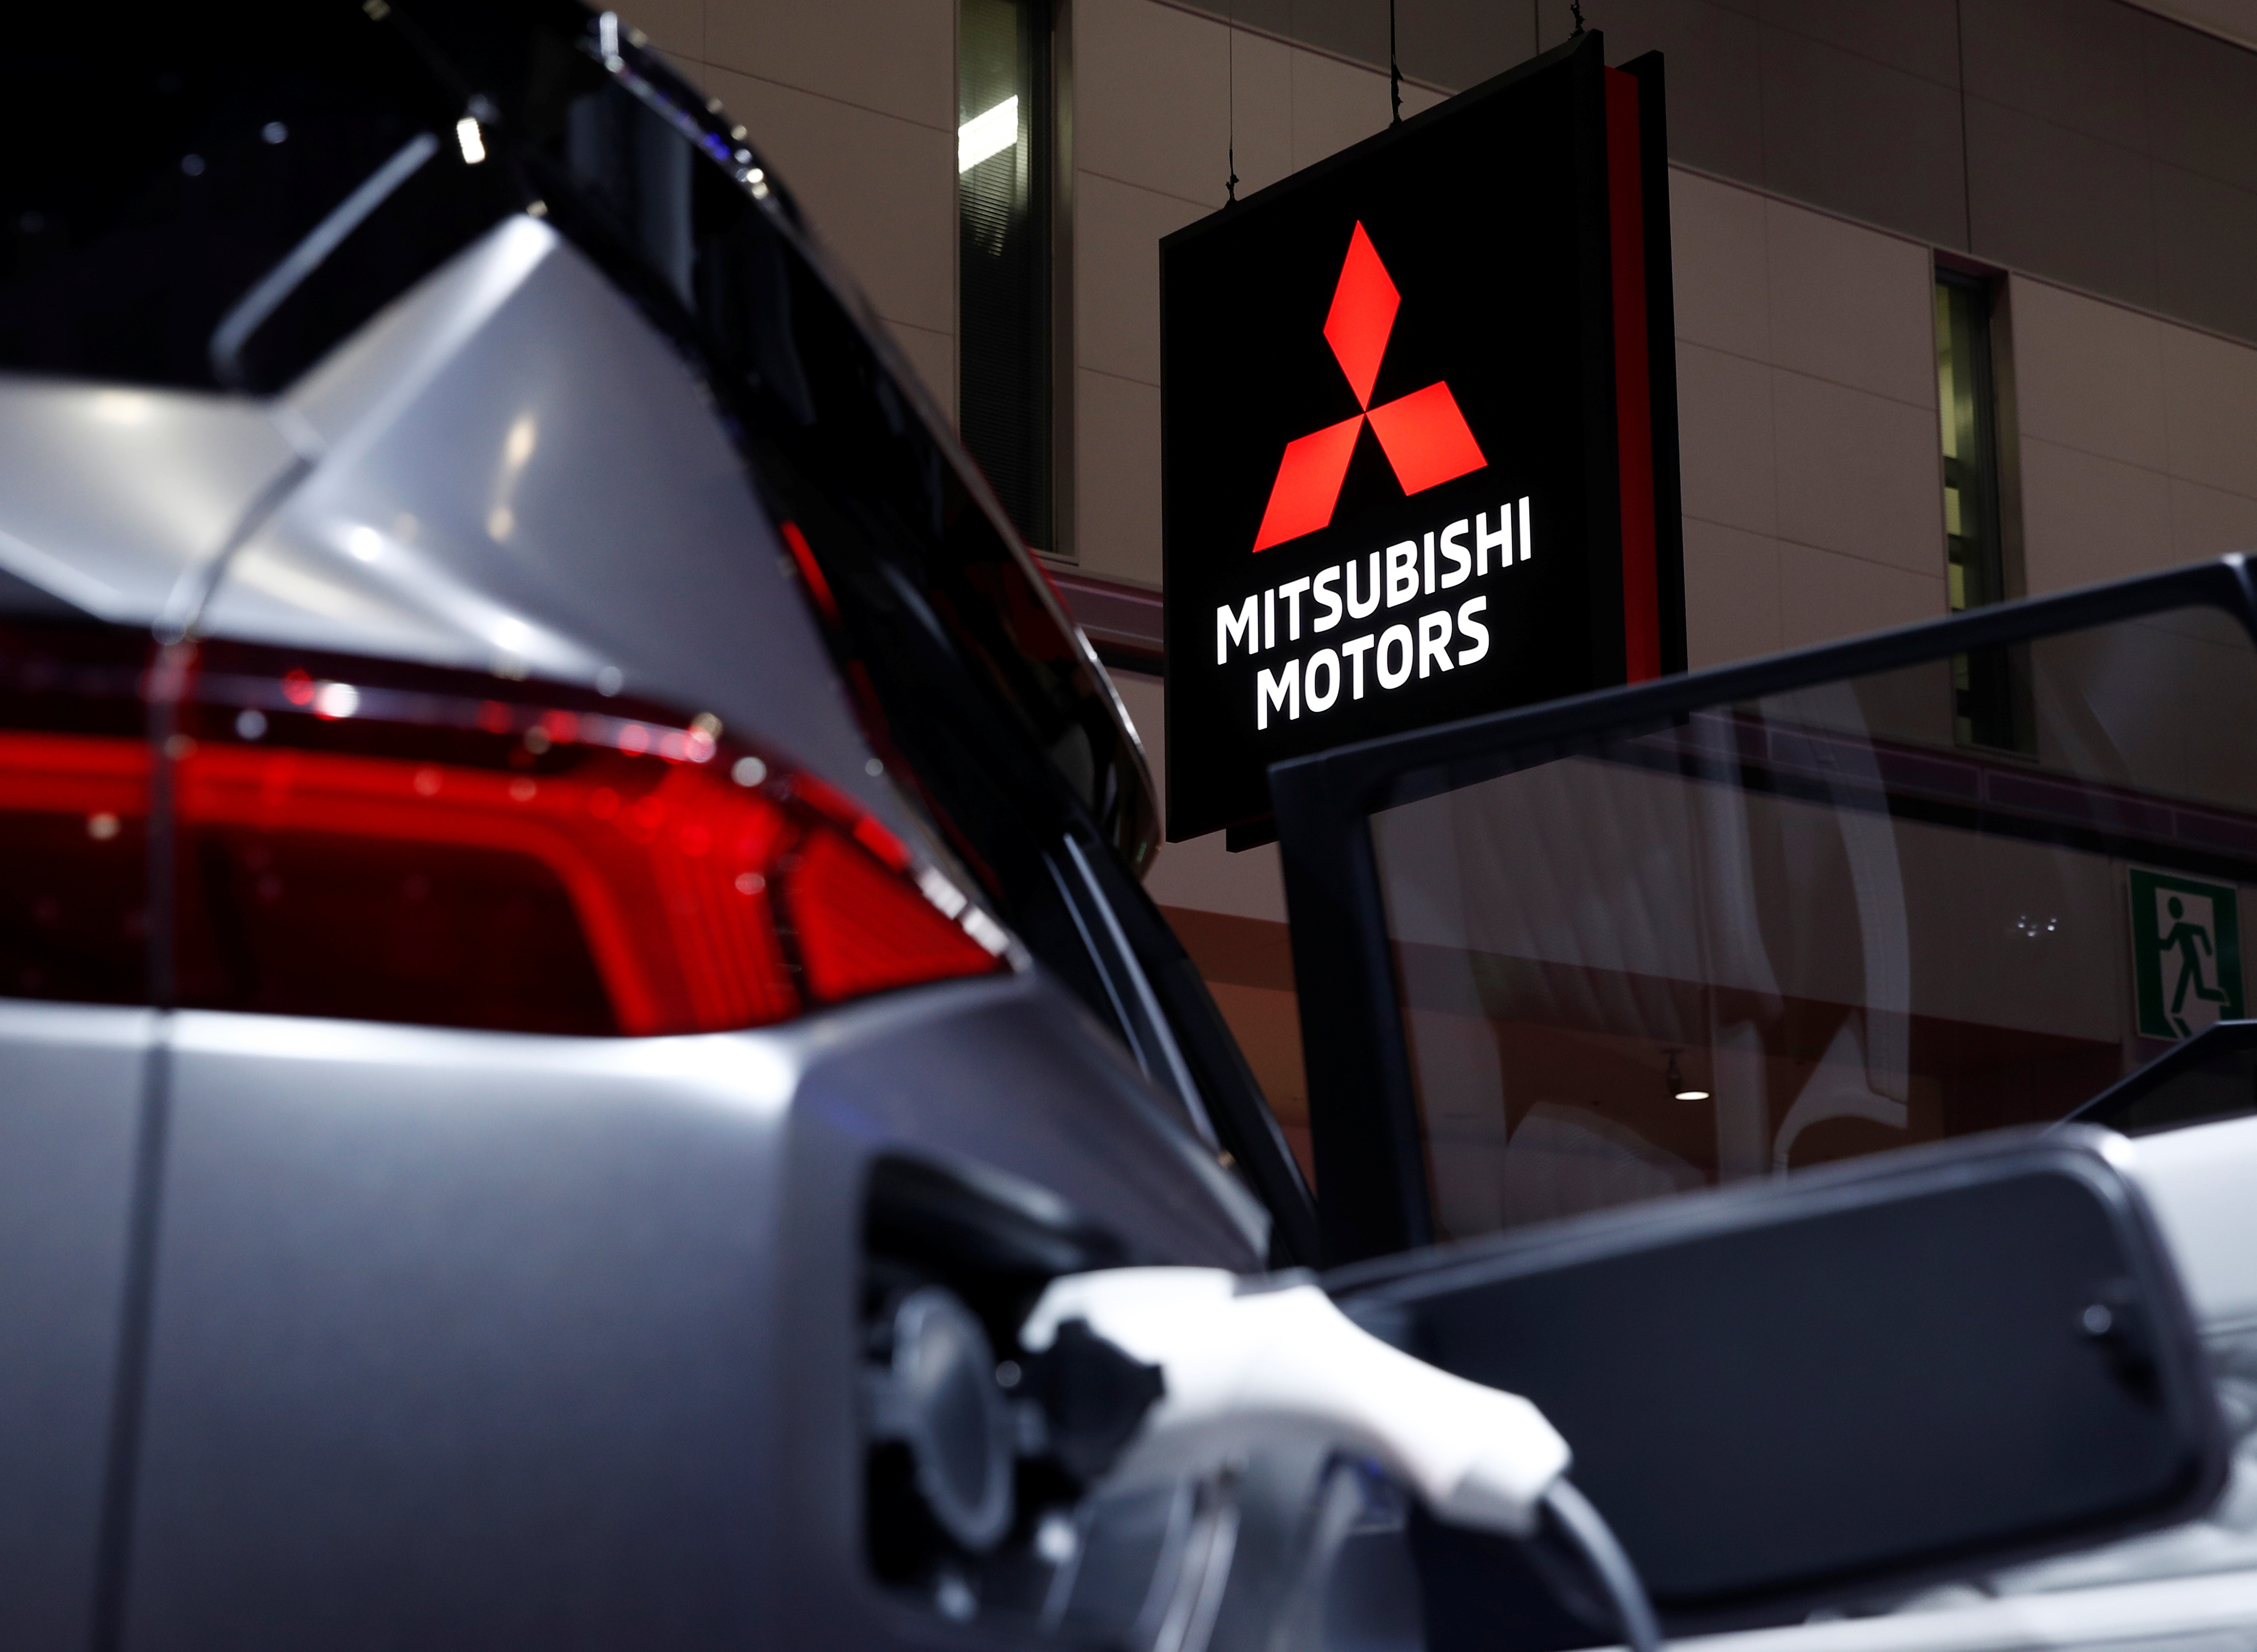 A Mitsubishi Motors signage is pictured next to a Mitsubishi electric car at the Tokyo Motor Show